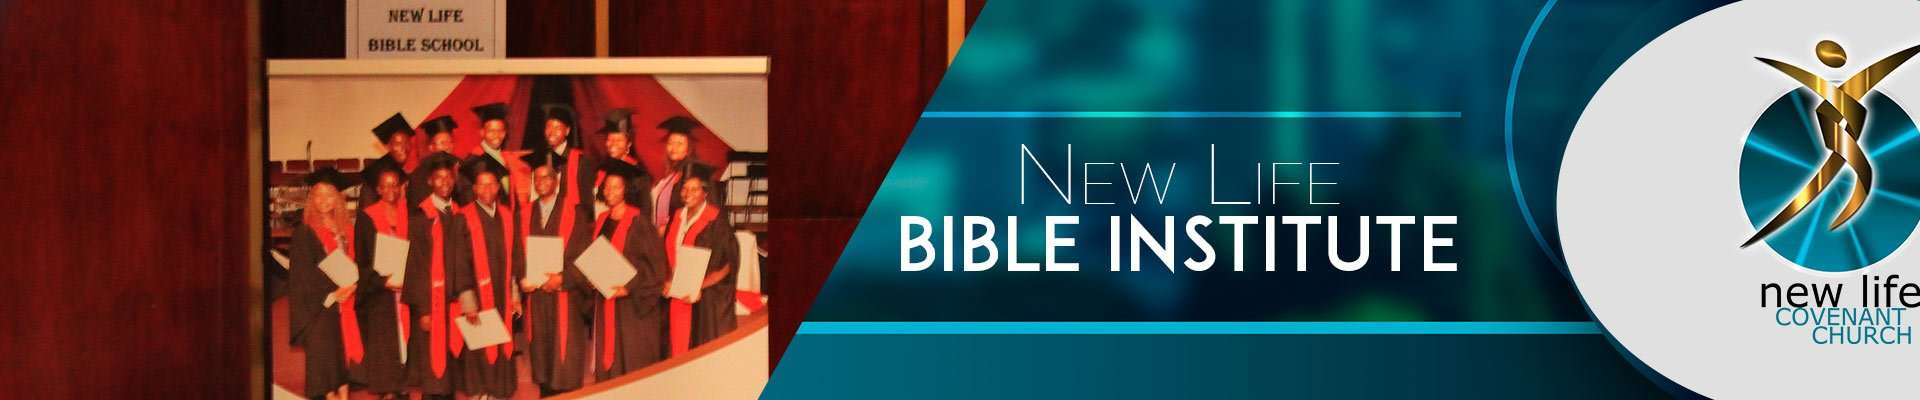 New Life Bible Institute â New Life Covenant Church